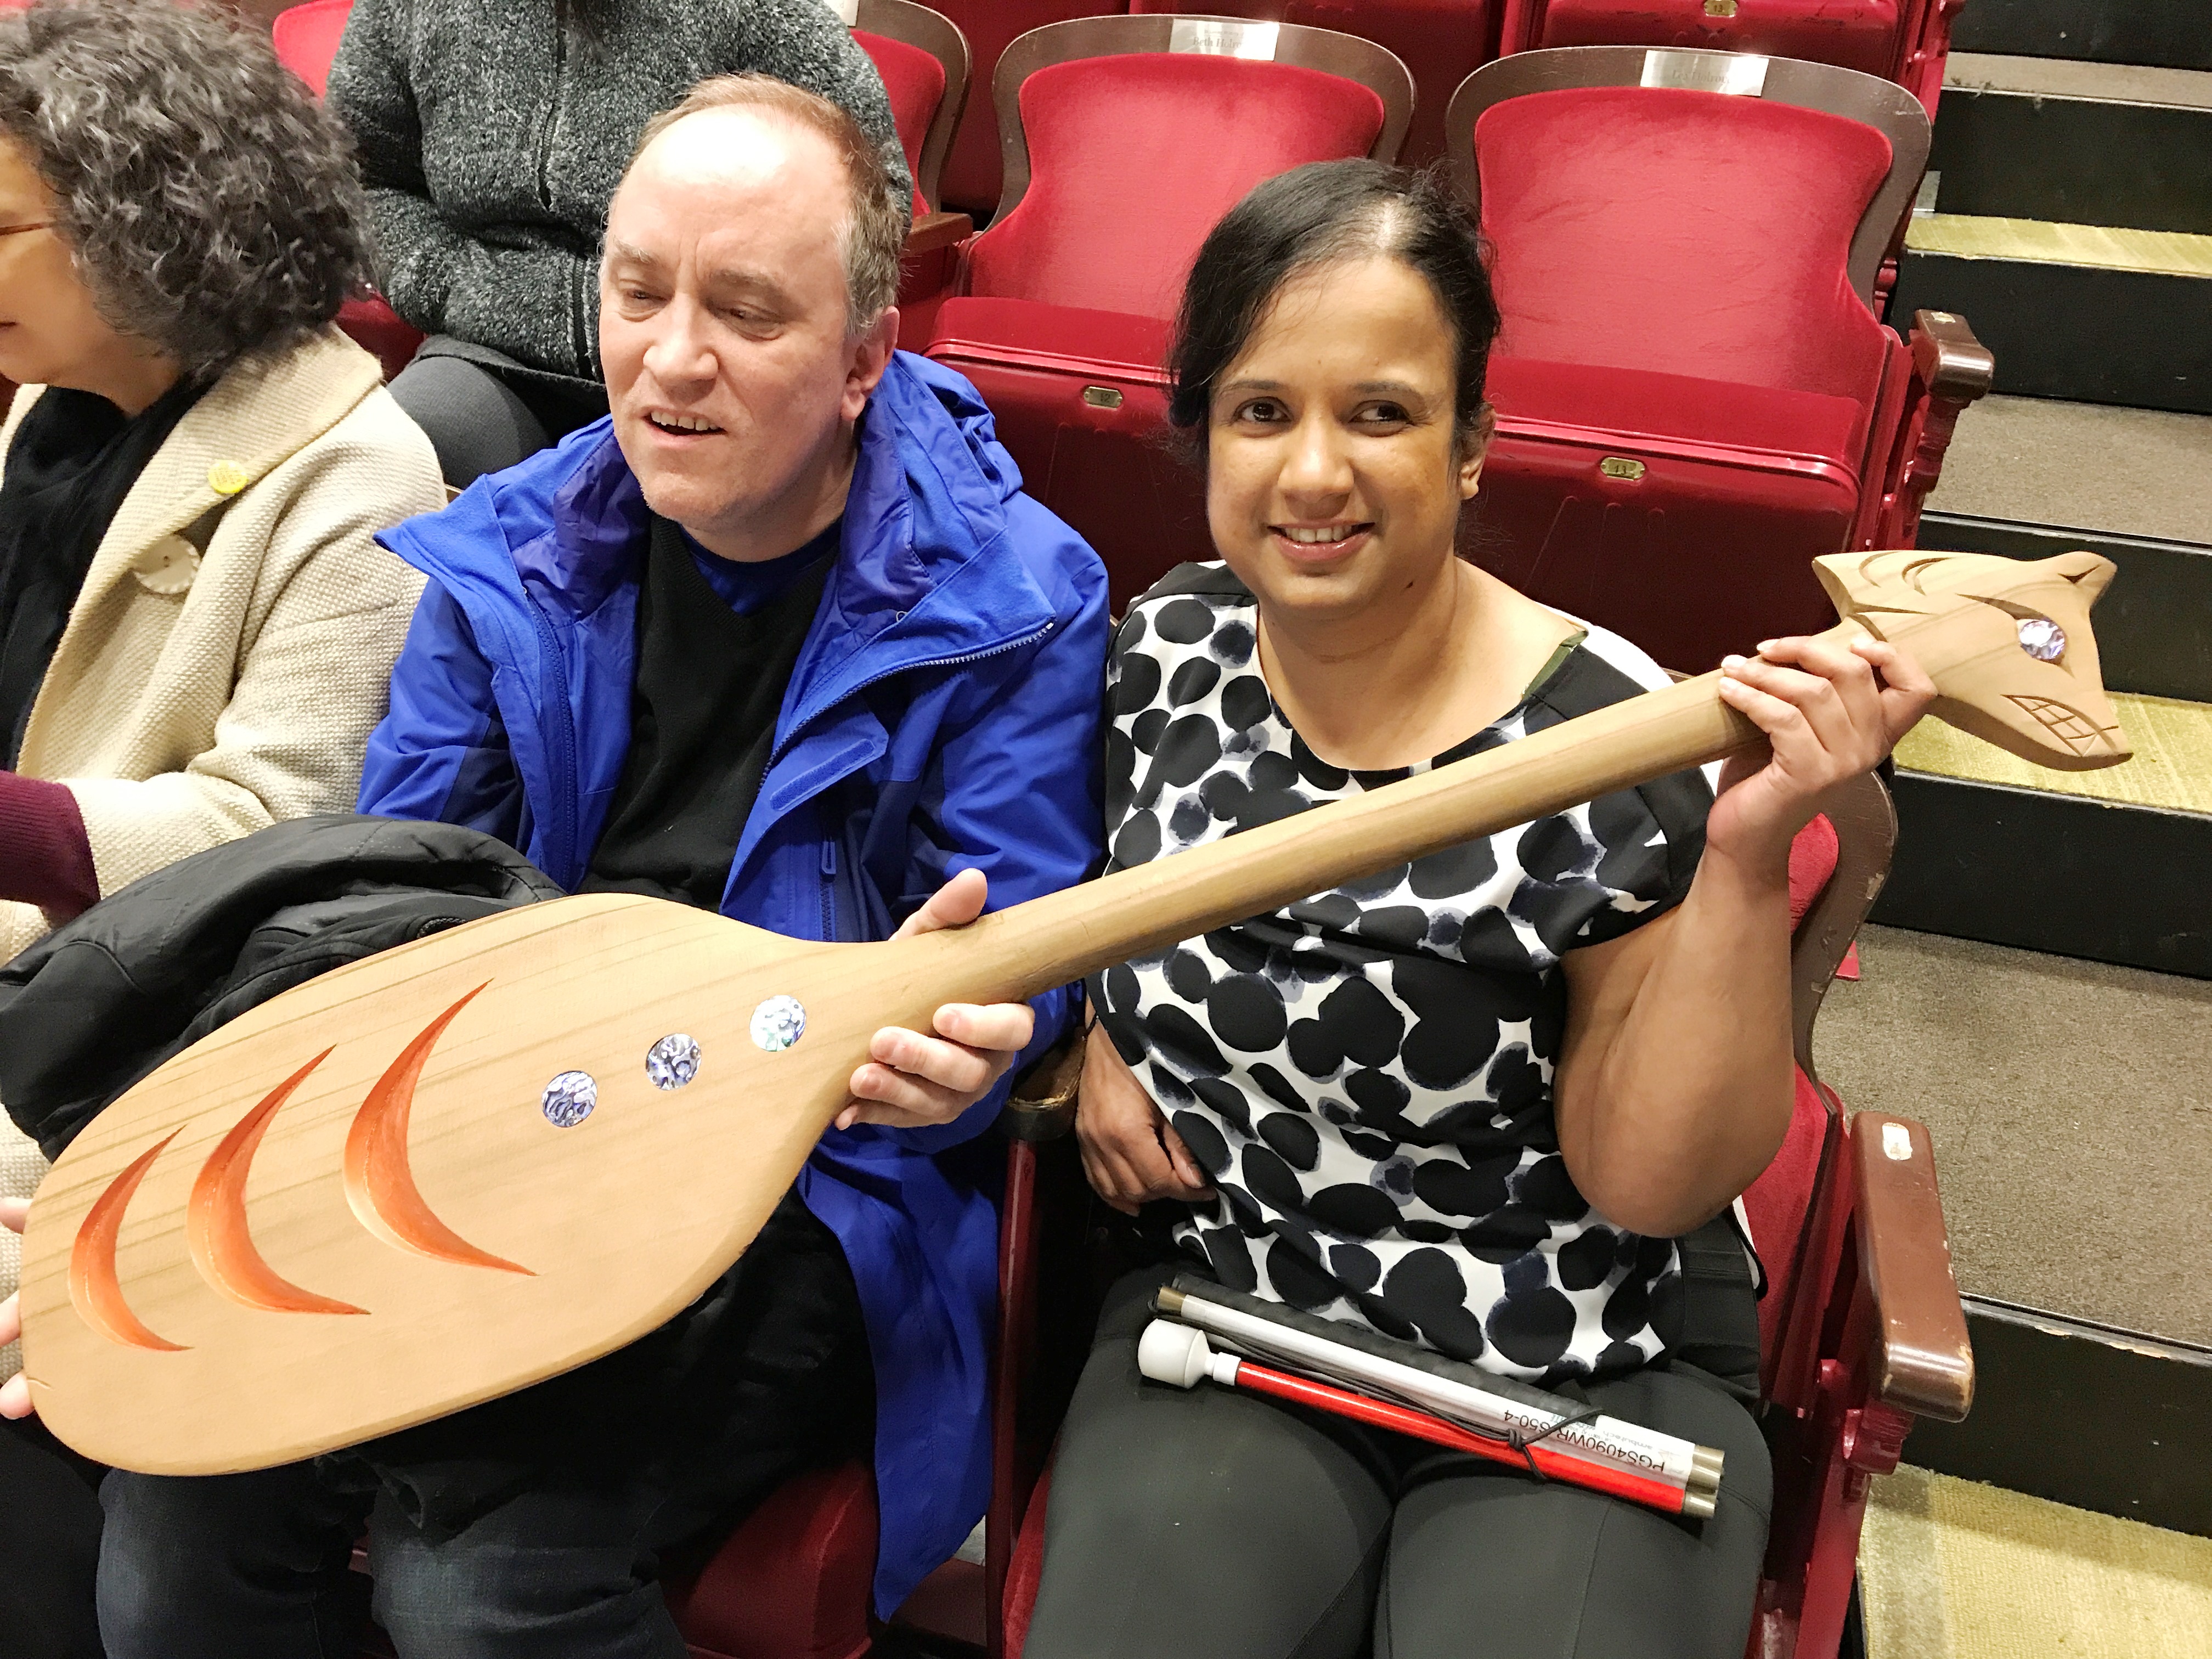 Shawn and Kristy during the Skyborn touch tour holding a paddle, decorated with abalone and carved with a wolf's head.